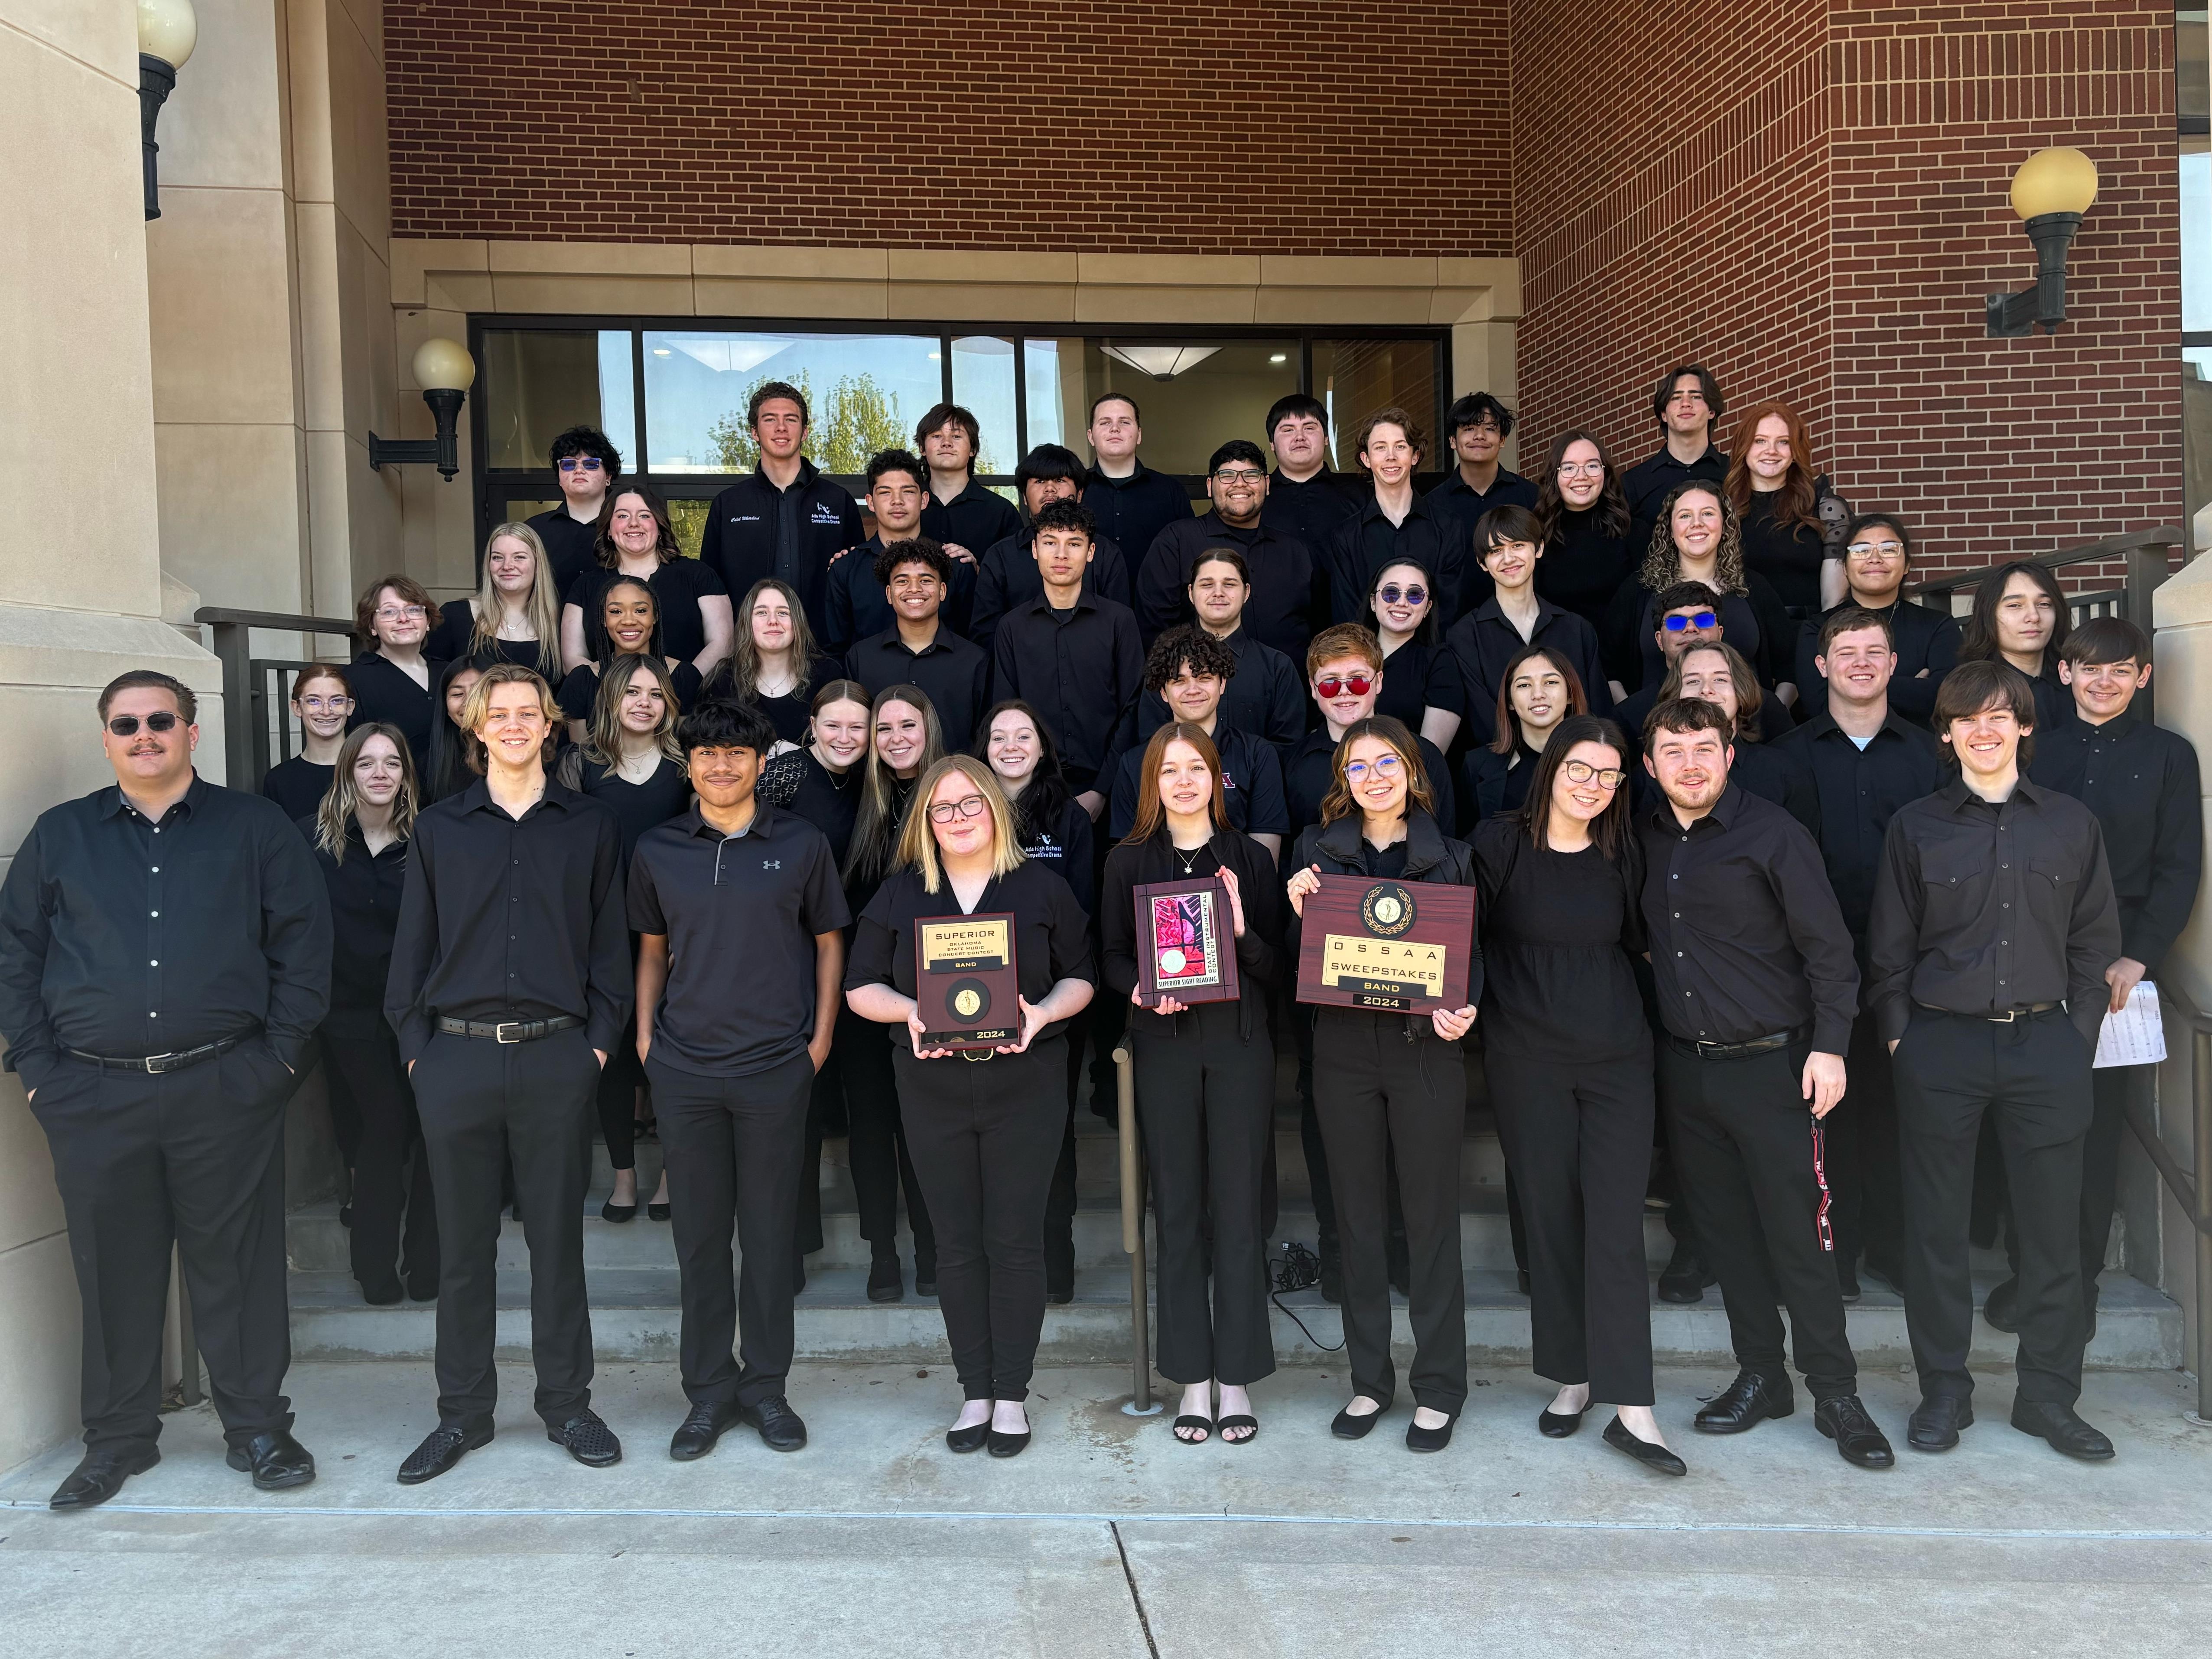 Ada High School Concert band poses for a picture holding awards. 